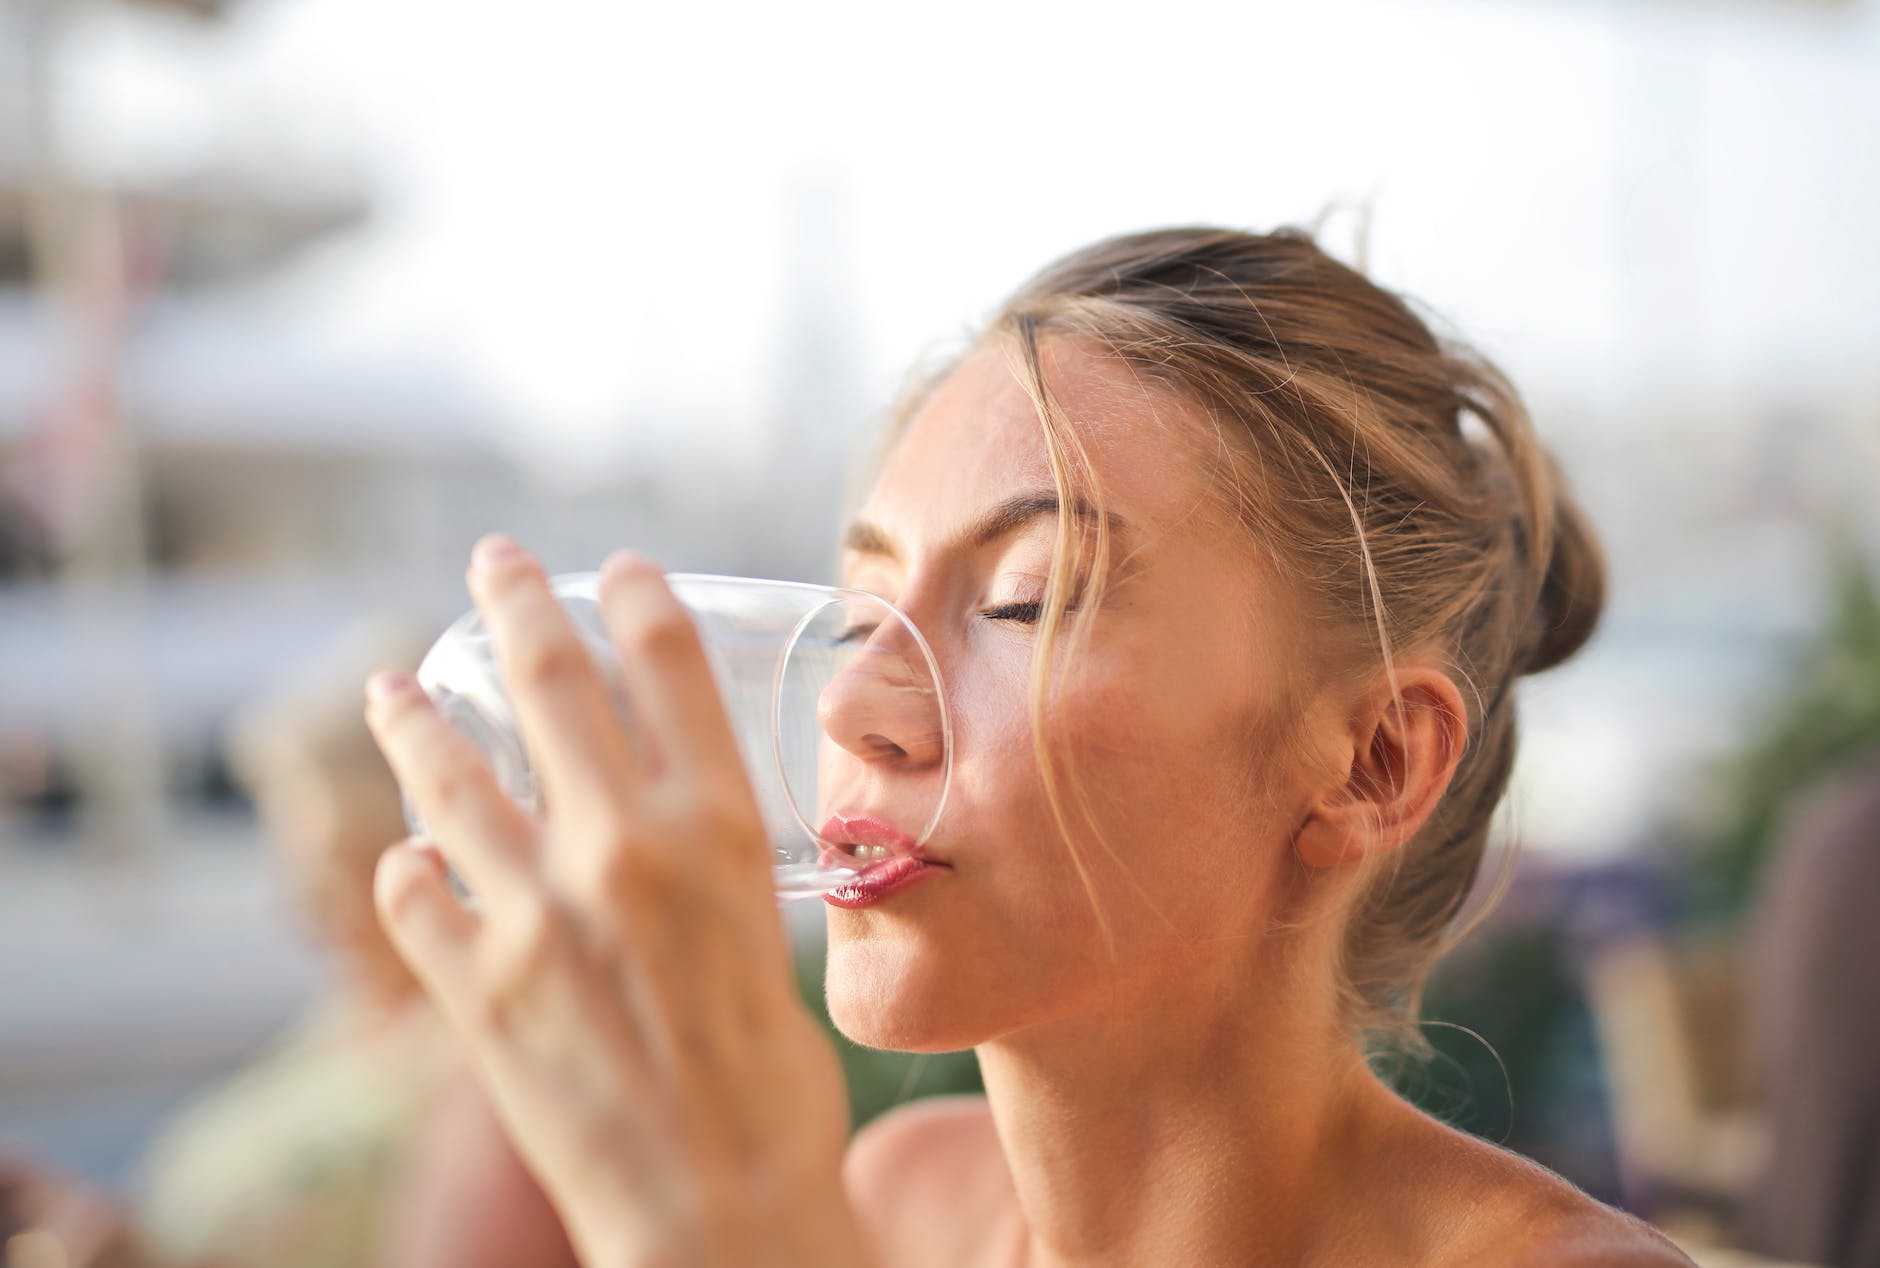 Drinking water on a keto diet